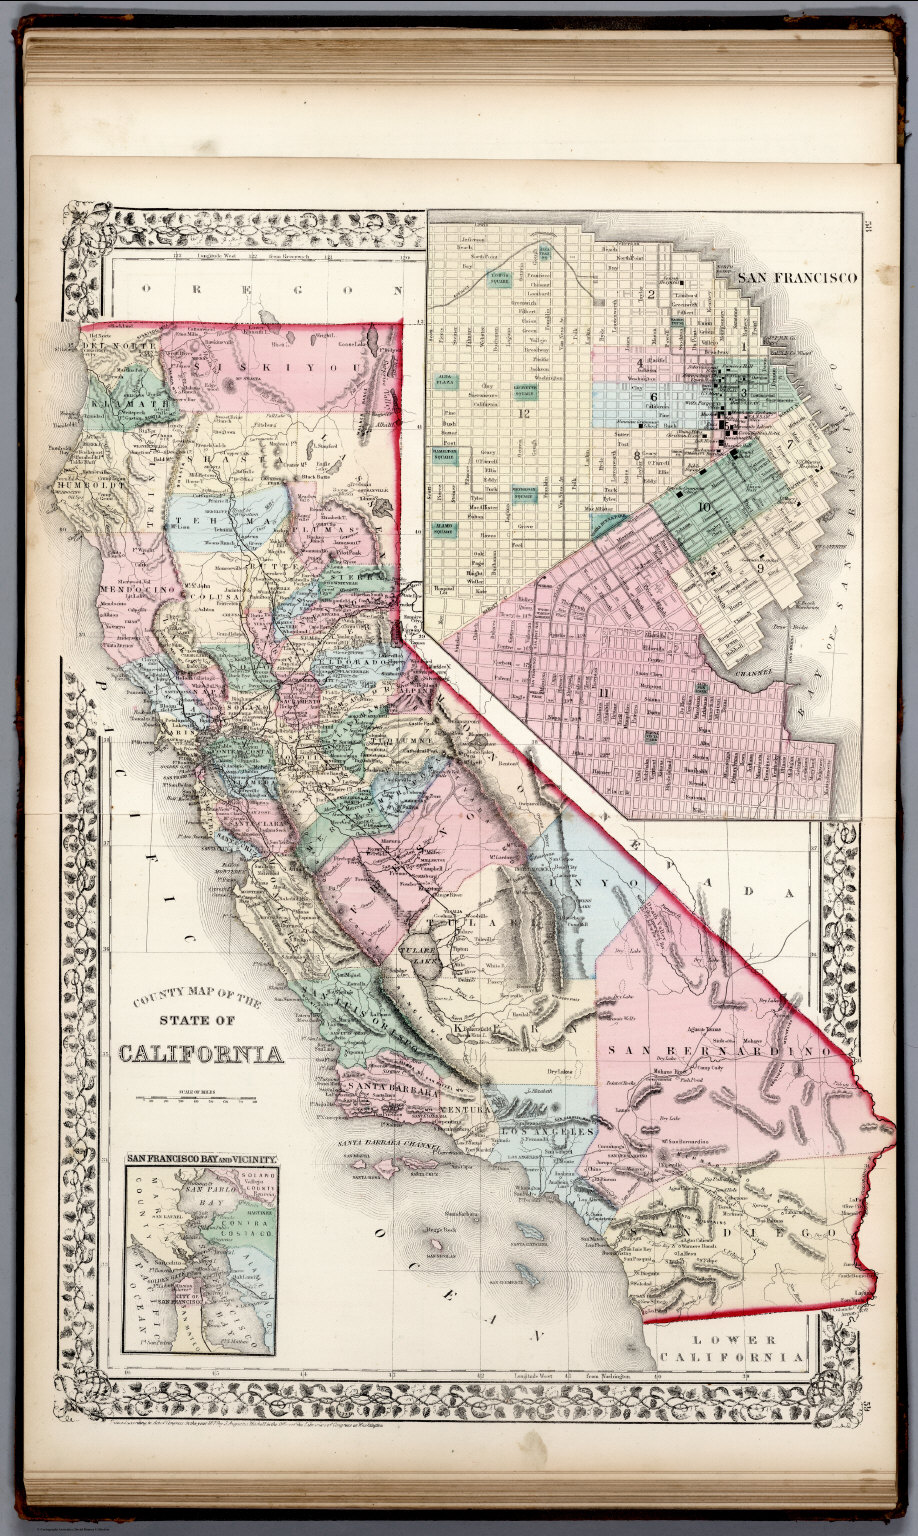 County Map Of The State Of California David Rumsey Historical Map Collection